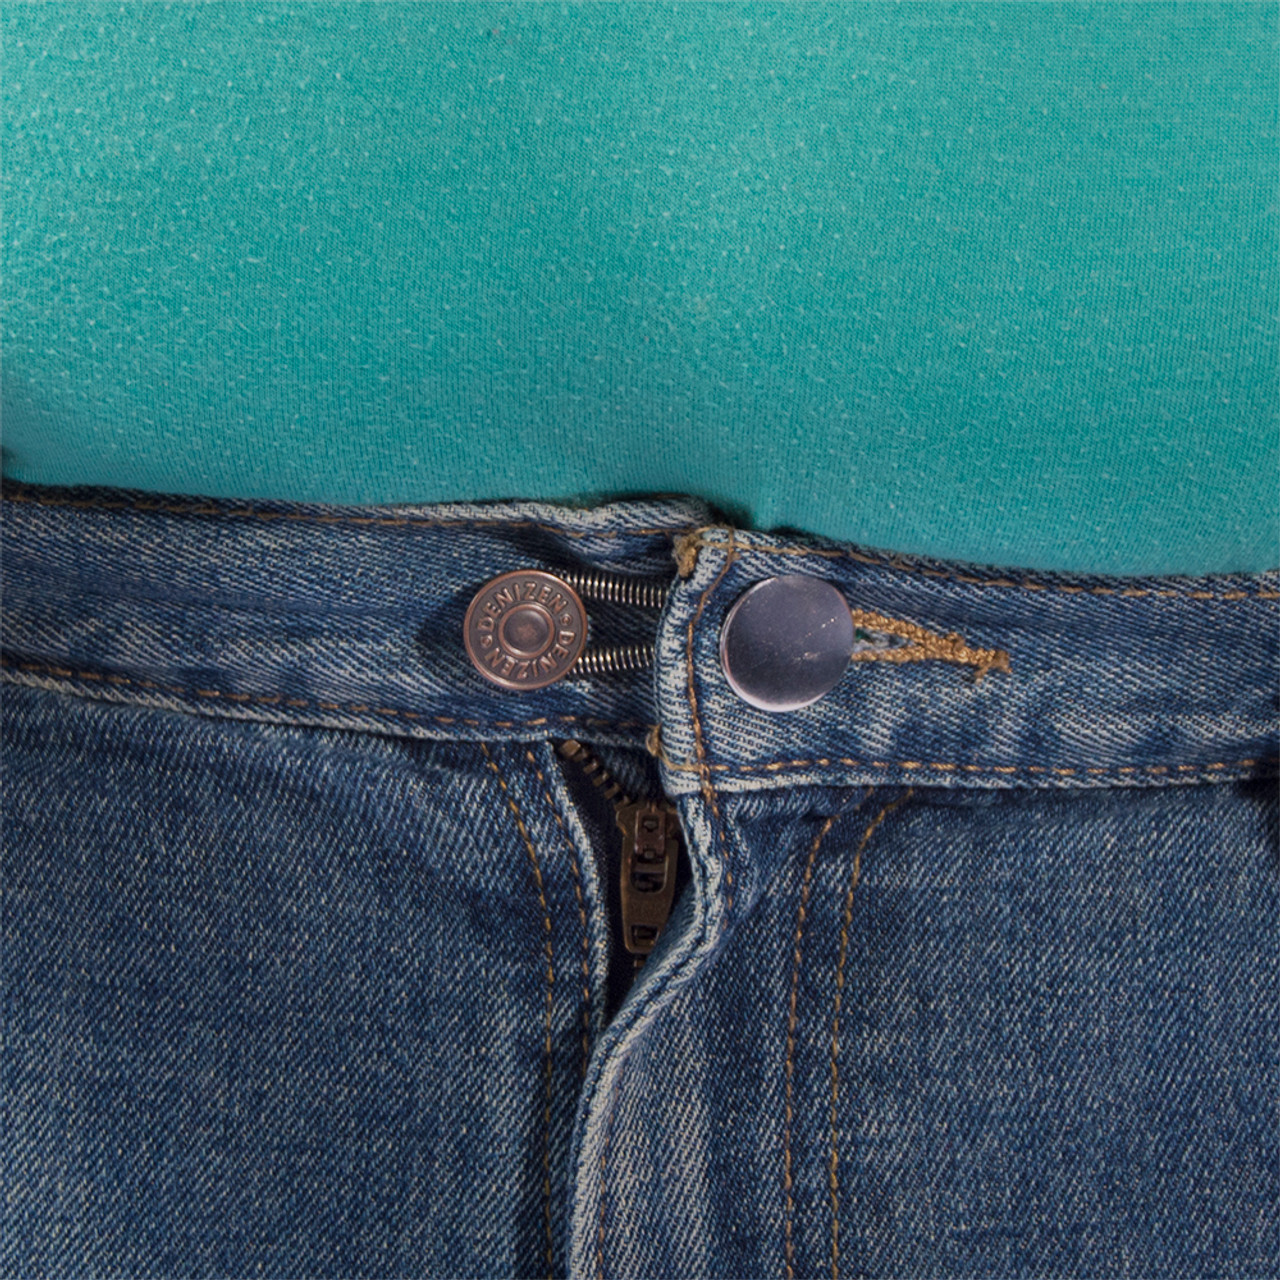 Spring Button Pant Extender - Adds up to 2 instantly!